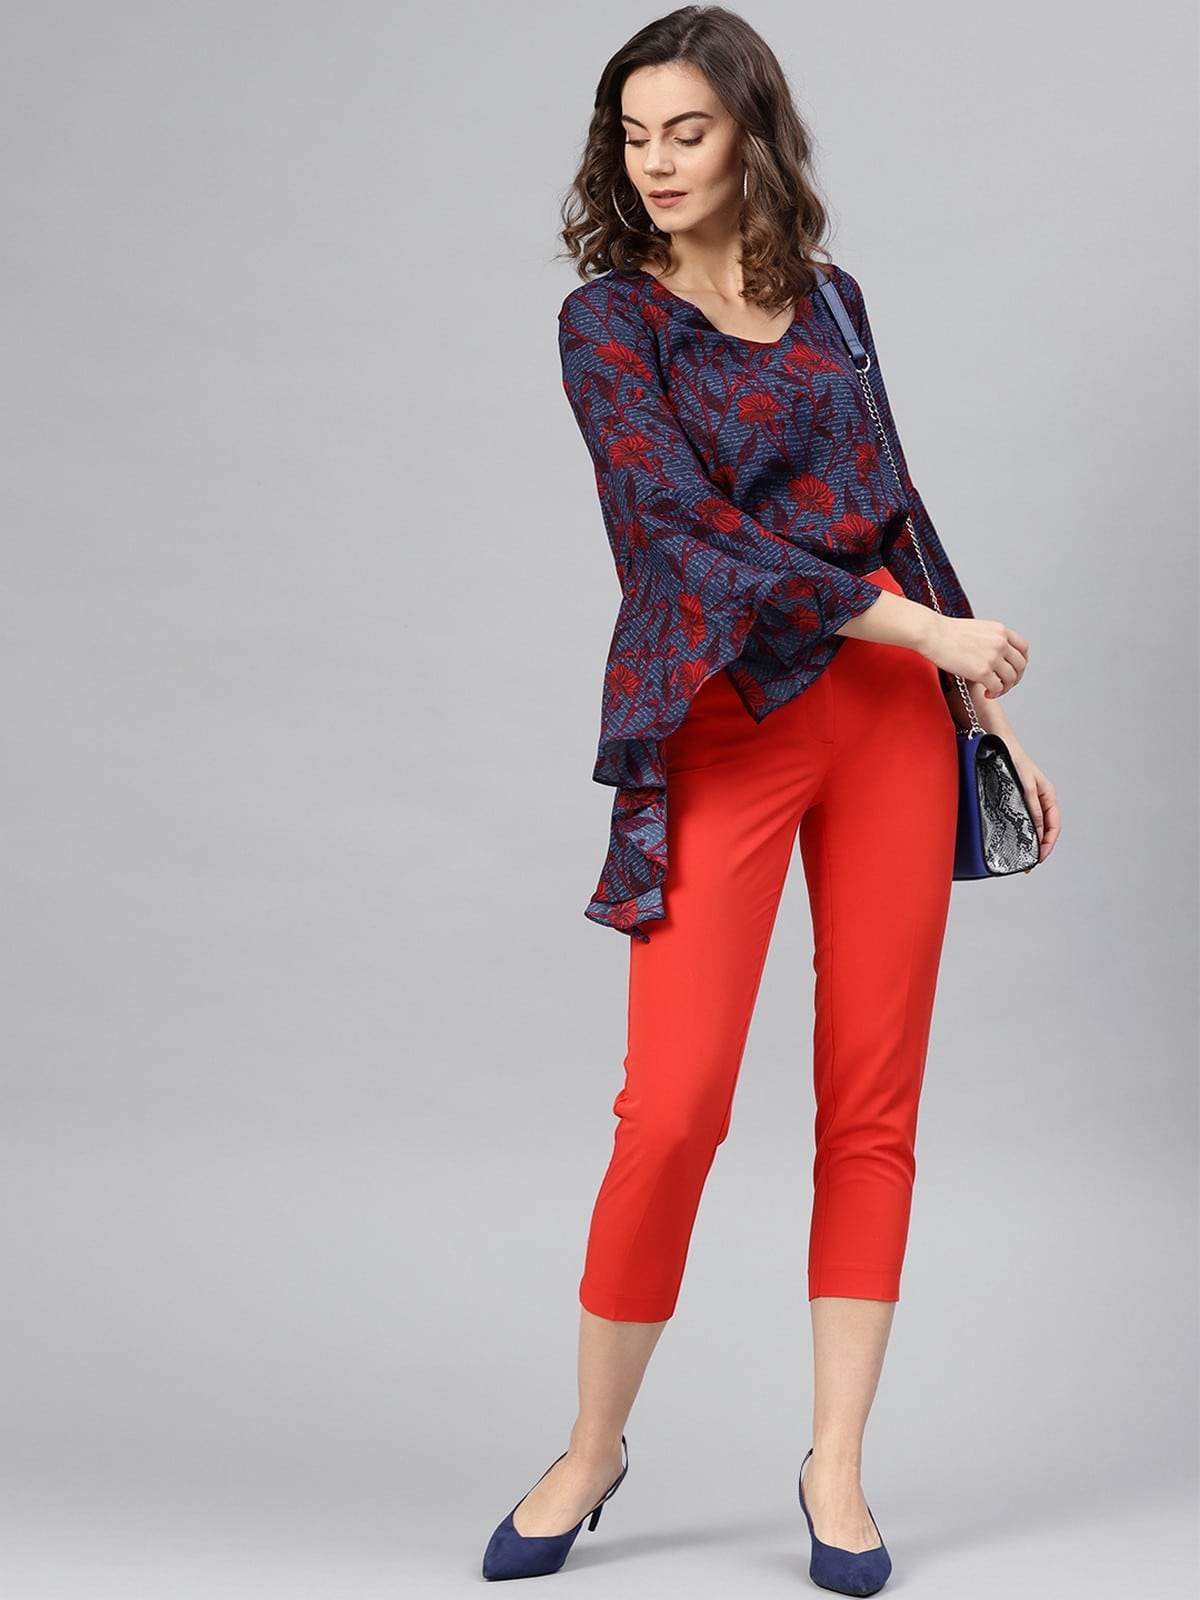 Women's Floral Printed Top - Pannkh